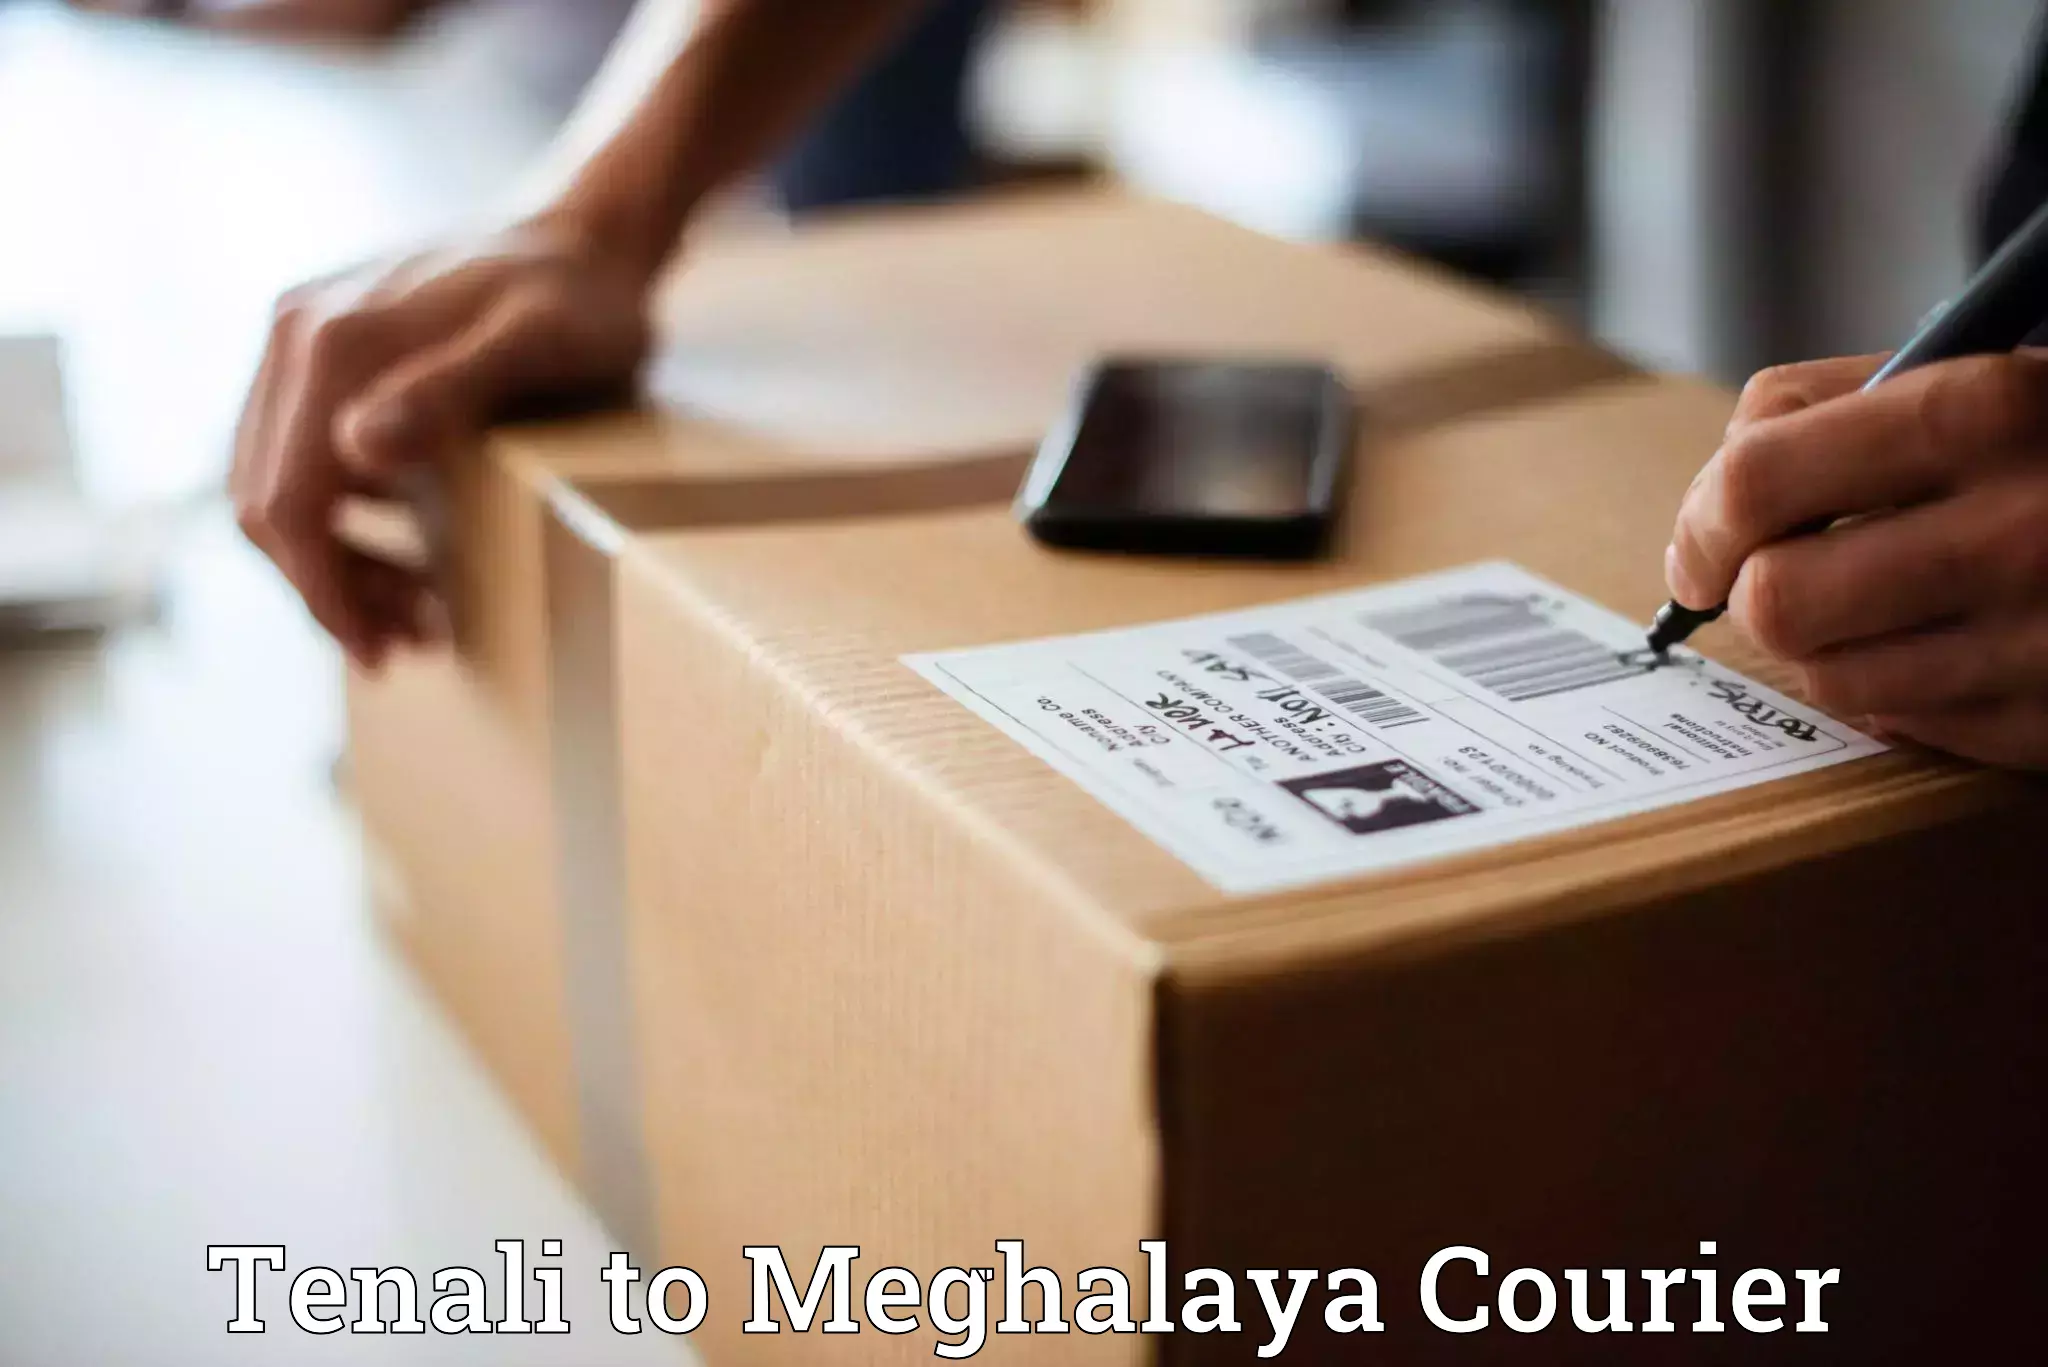 State-of-the-art courier technology Tenali to Meghalaya